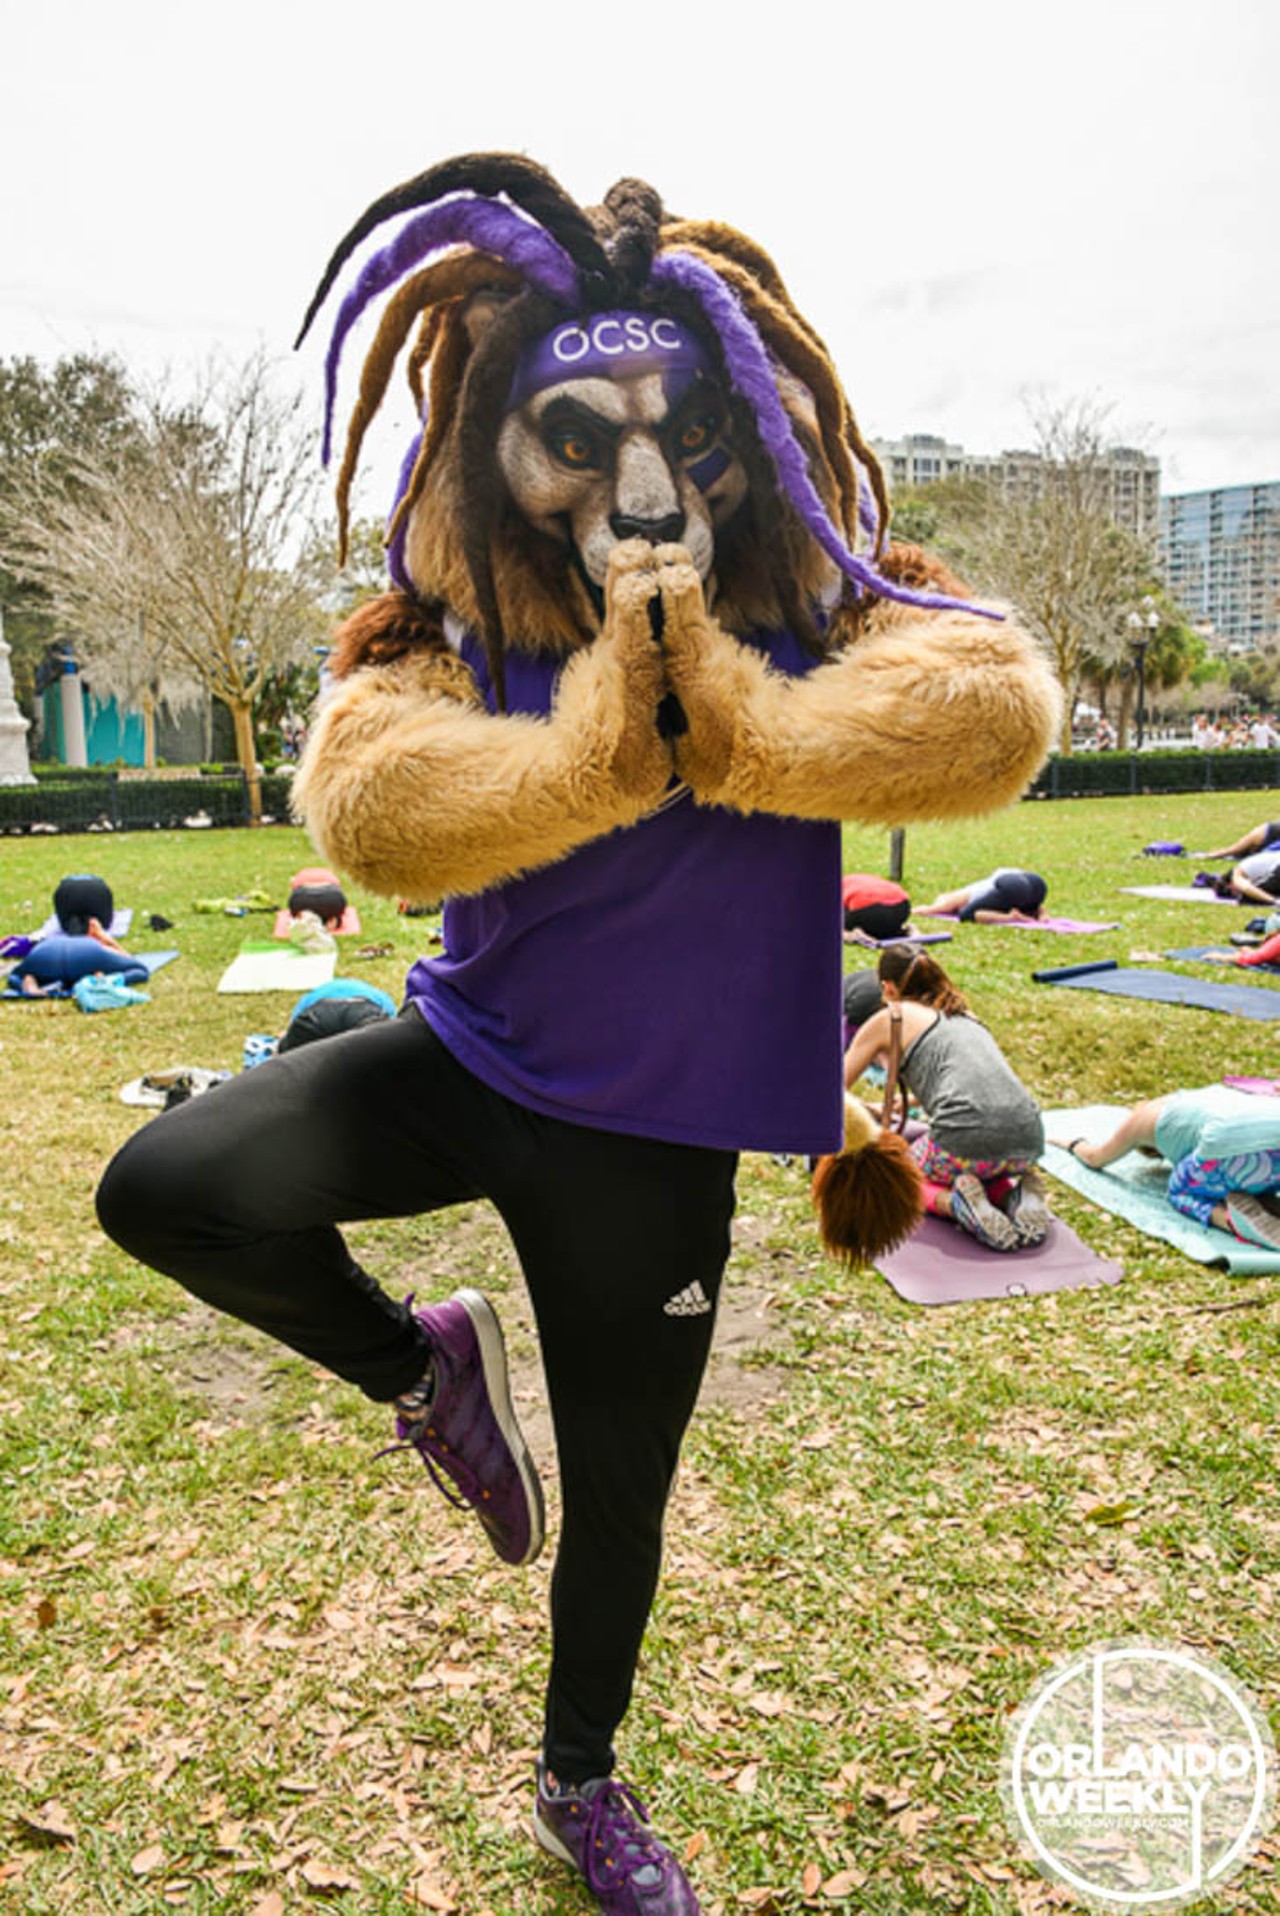 54 photos from It's Just Yoga Festival at Lake Eola Park